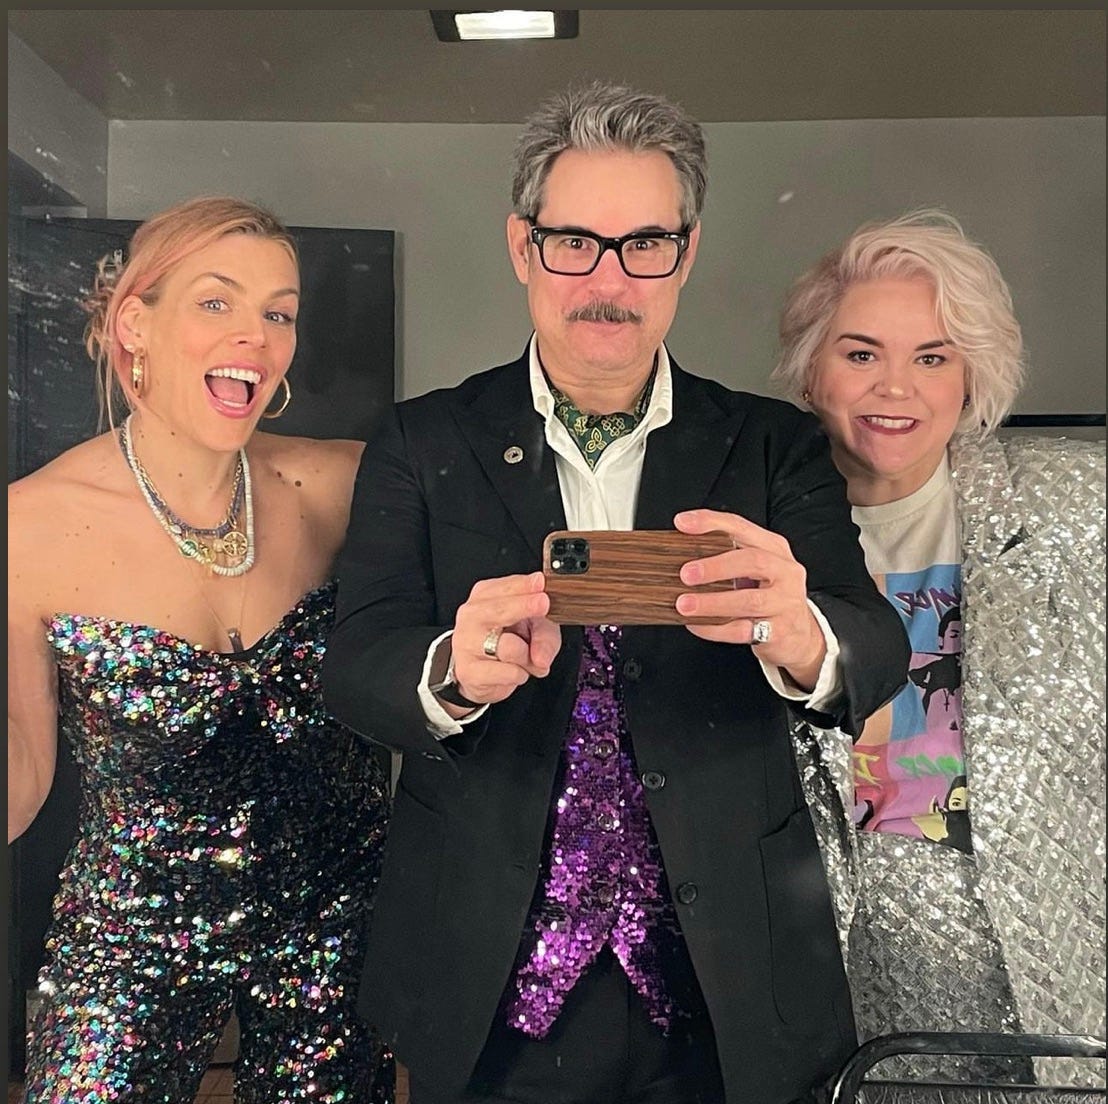 Busy, Paul F. Tompkins and Caissie backstage at their live show in San Francisco. Not pictured, Janie Haddad Tompkins